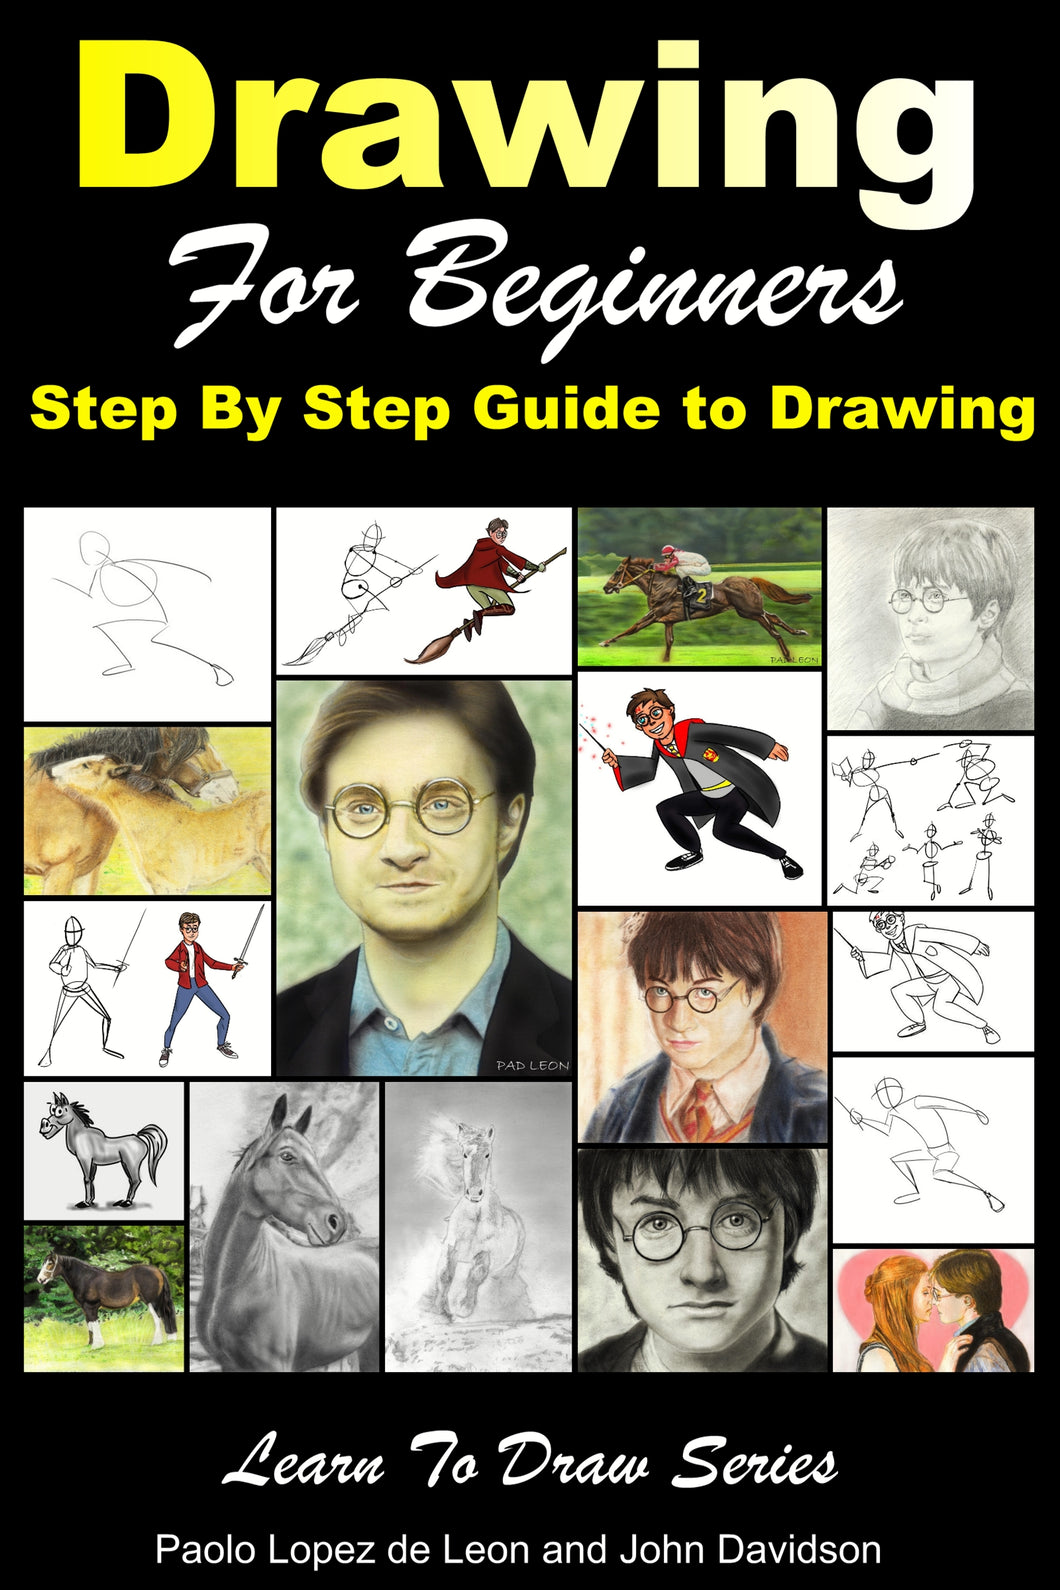 Drawing for Beginners - Step By Step Guide to Drawing